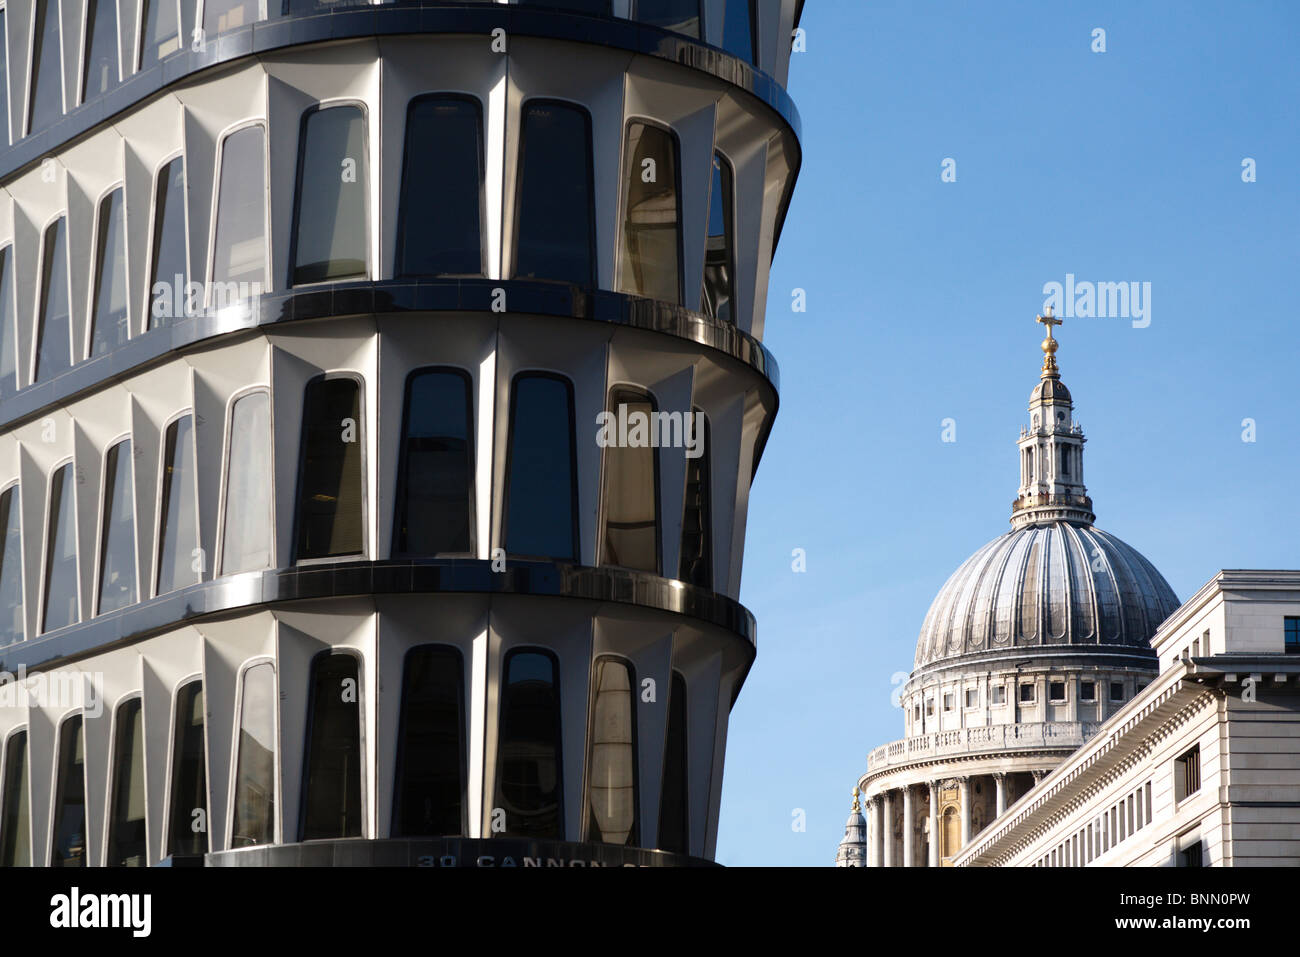 The Corner of 30 Cannon Street with the dome of St.Paul's Cathedral in the background Stock Photo